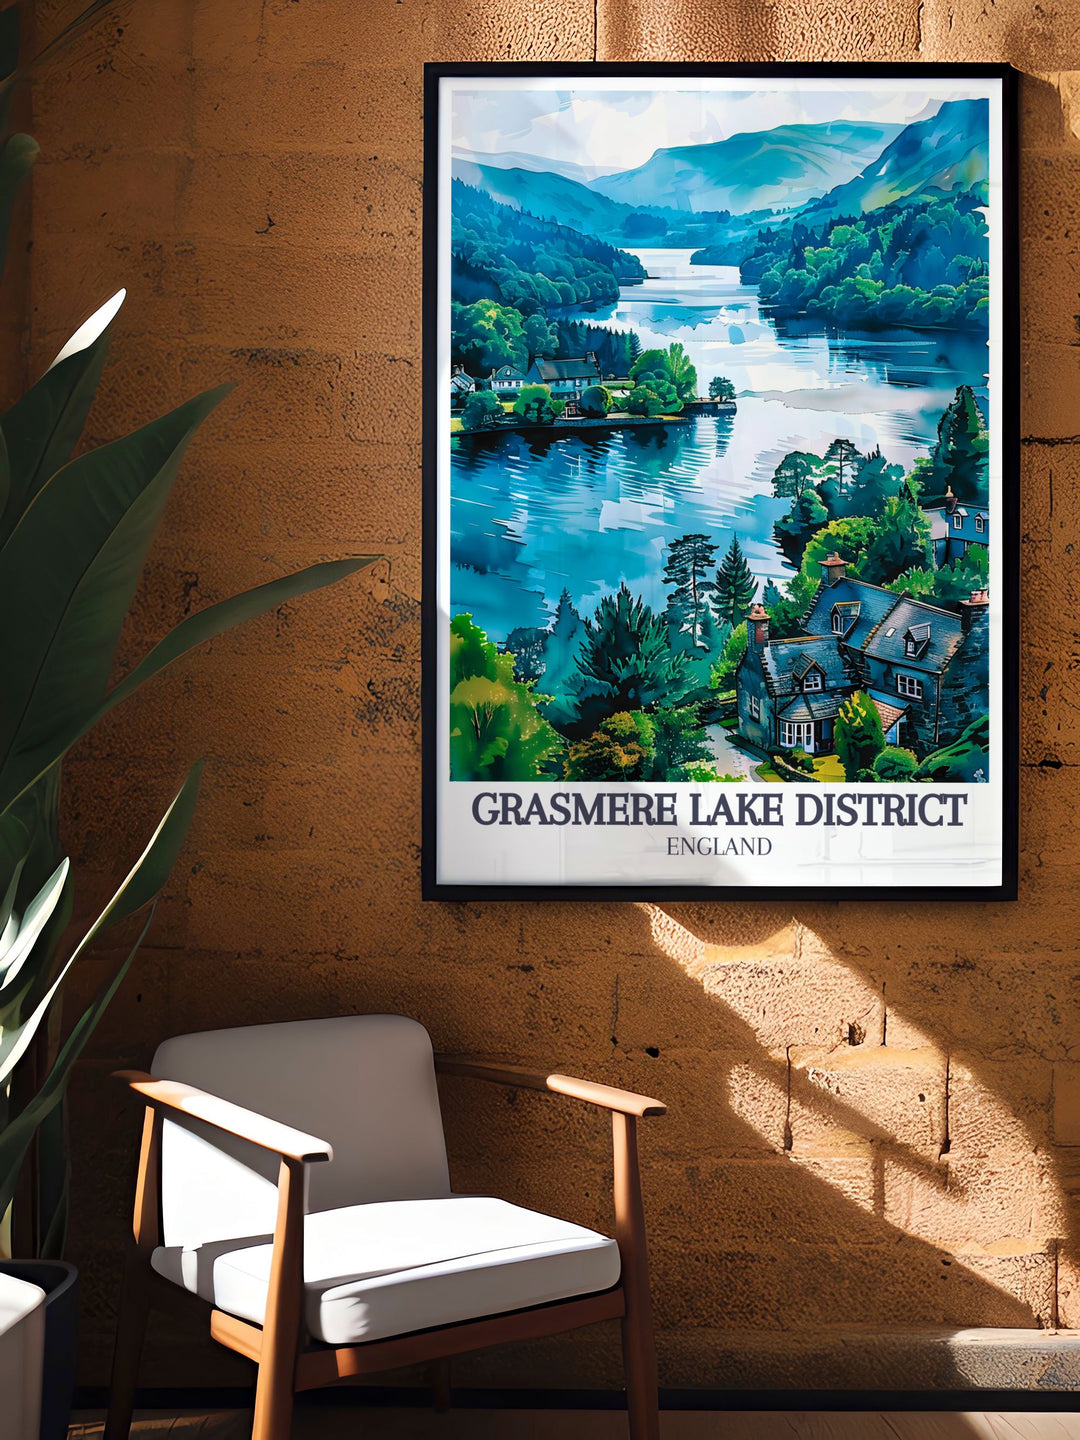 This travel poster of Grasmere in the Lake District, England, features the calm lake and charming village, creating a vibrant and detailed artwork that celebrates the regions unique scenery.